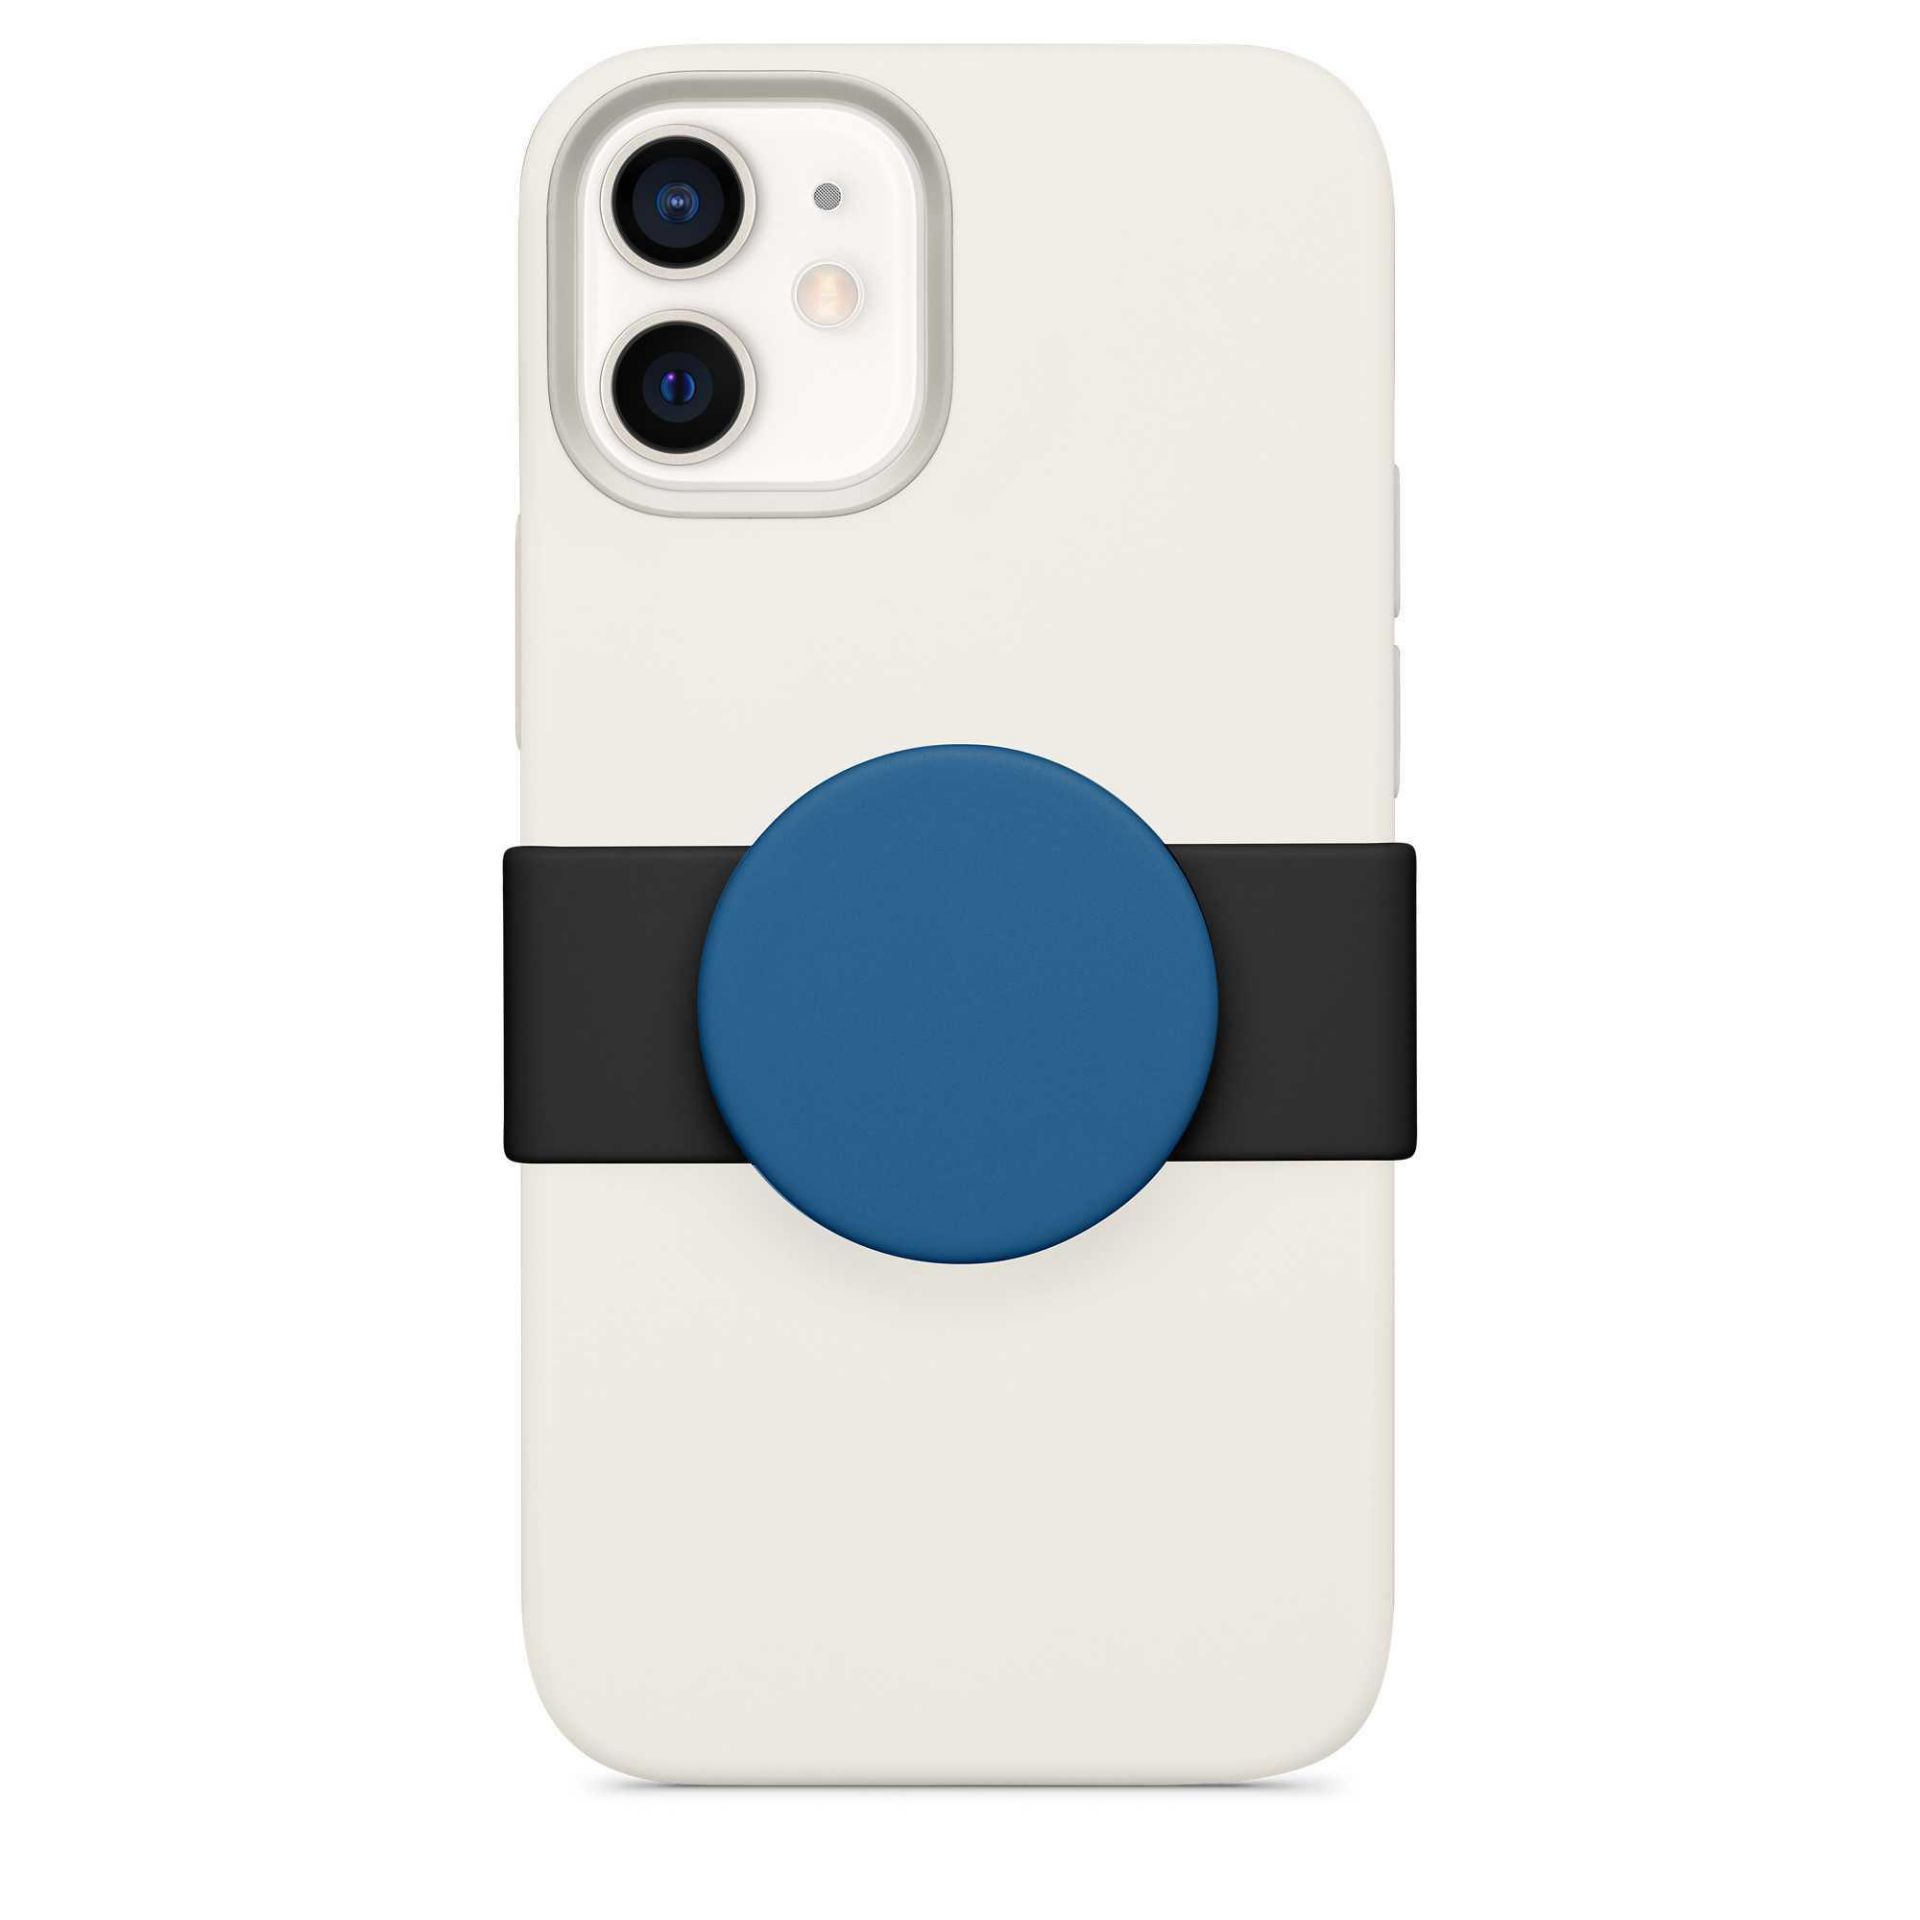 RRP £200 Lot To Contain 20 Brand New Pop Slide Pop Sockets For Iphone 12 (Appraisals Available On